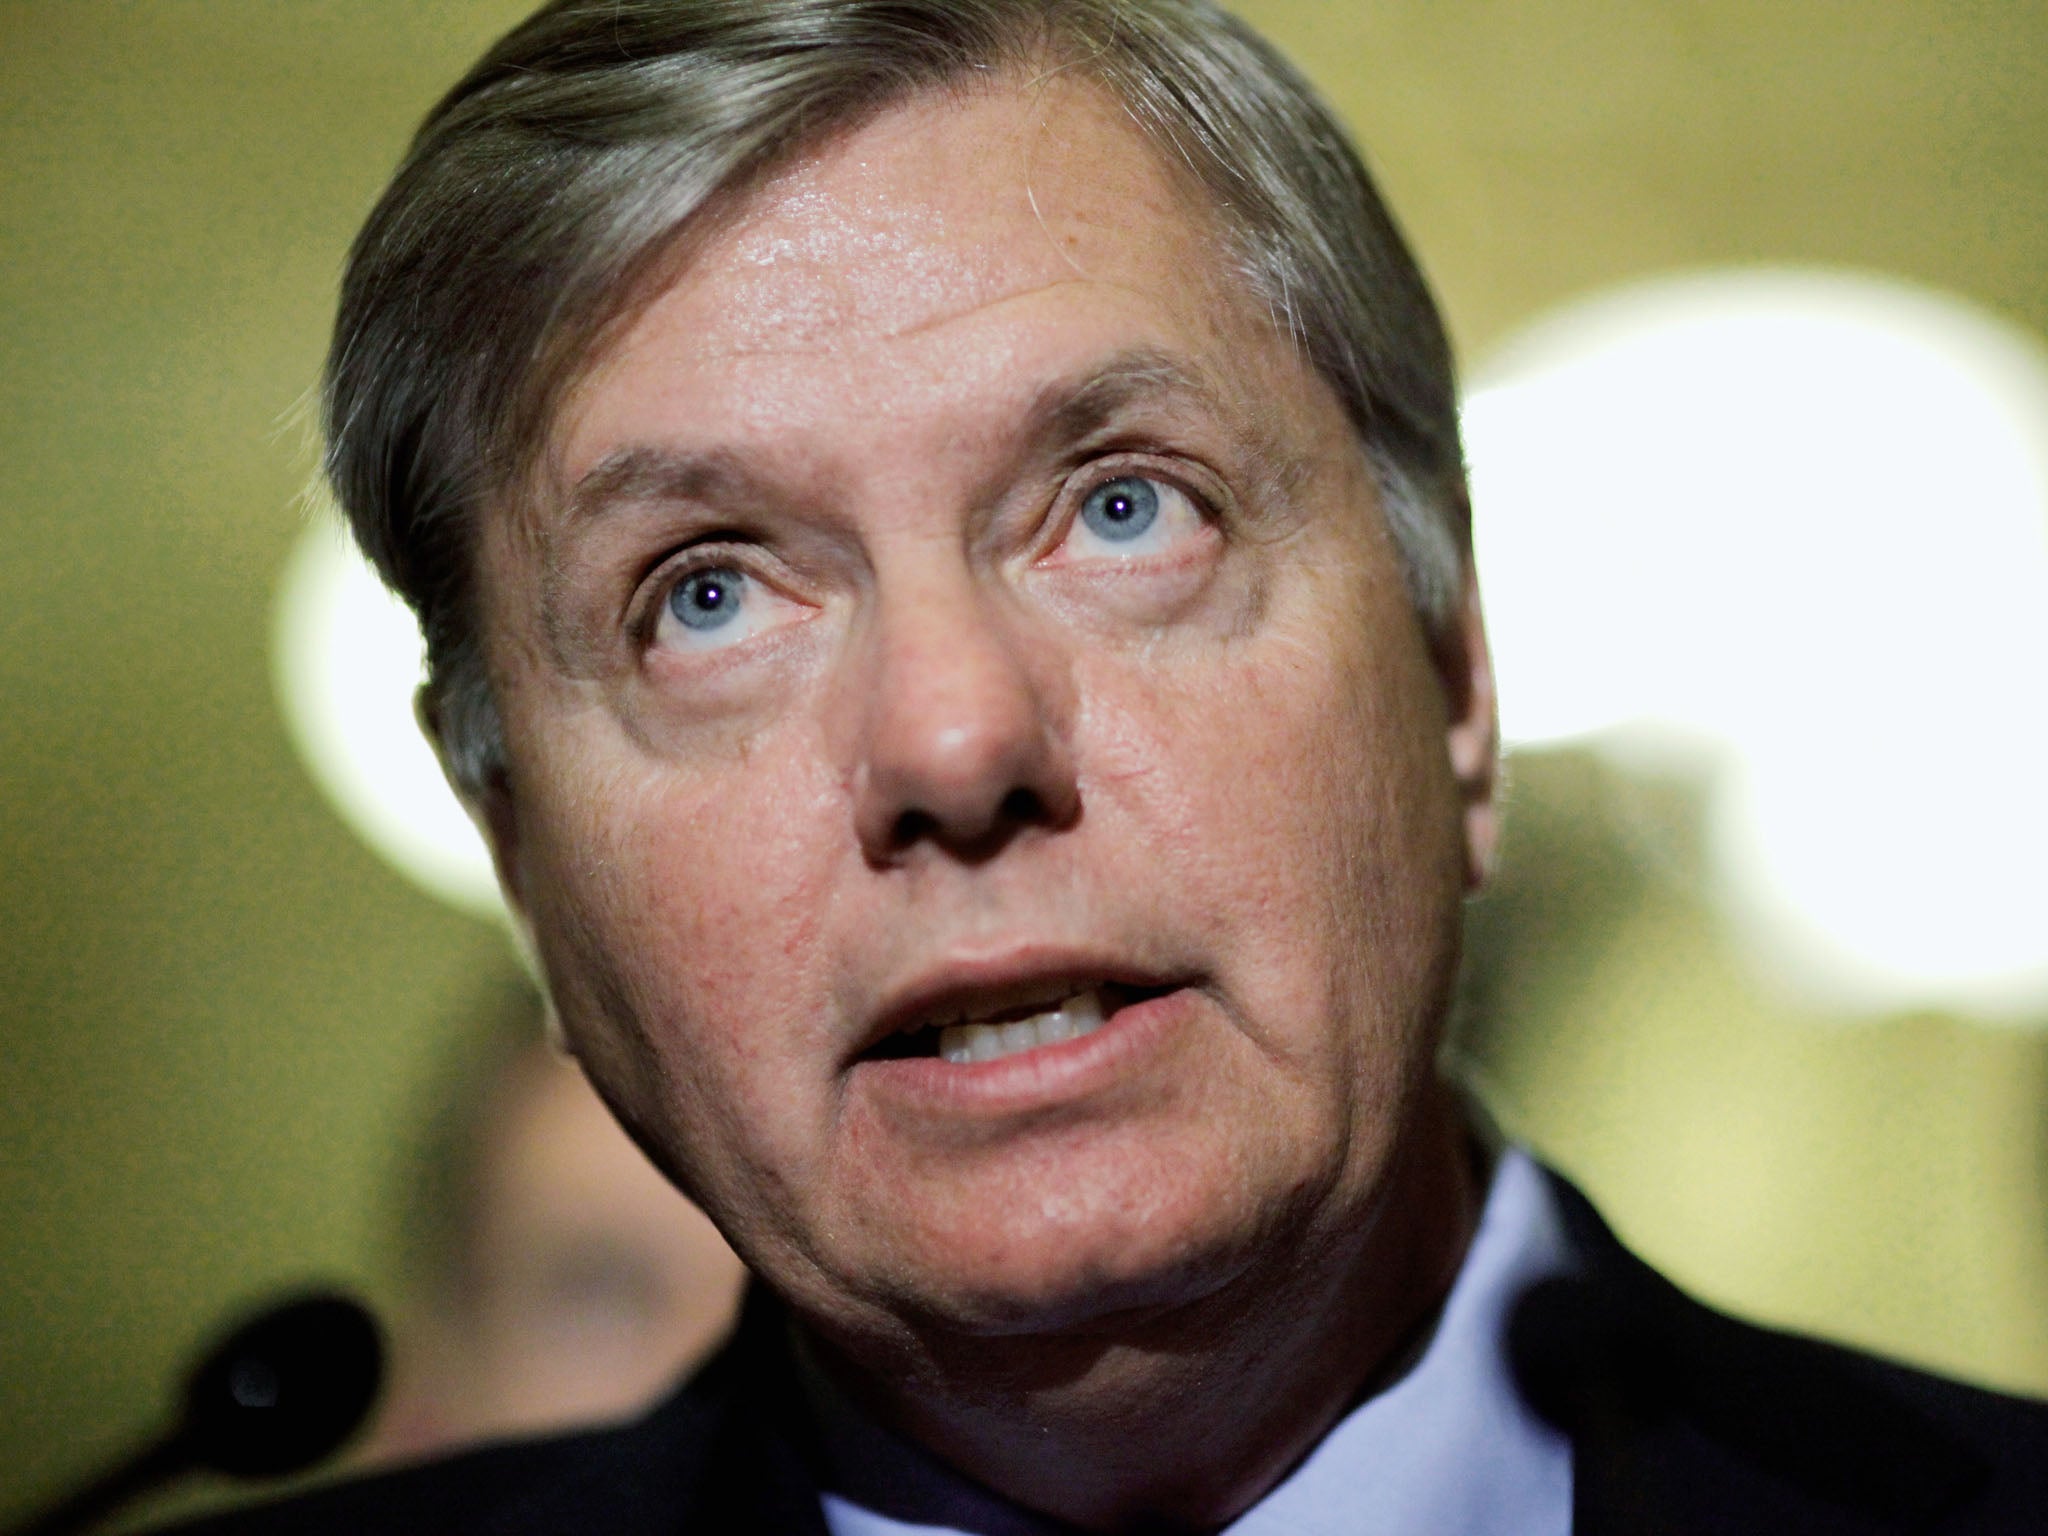 Senator Lindsey Graham: "I don't suggest you take my right to buy an AR-15 away from me, because I don't think it will work"